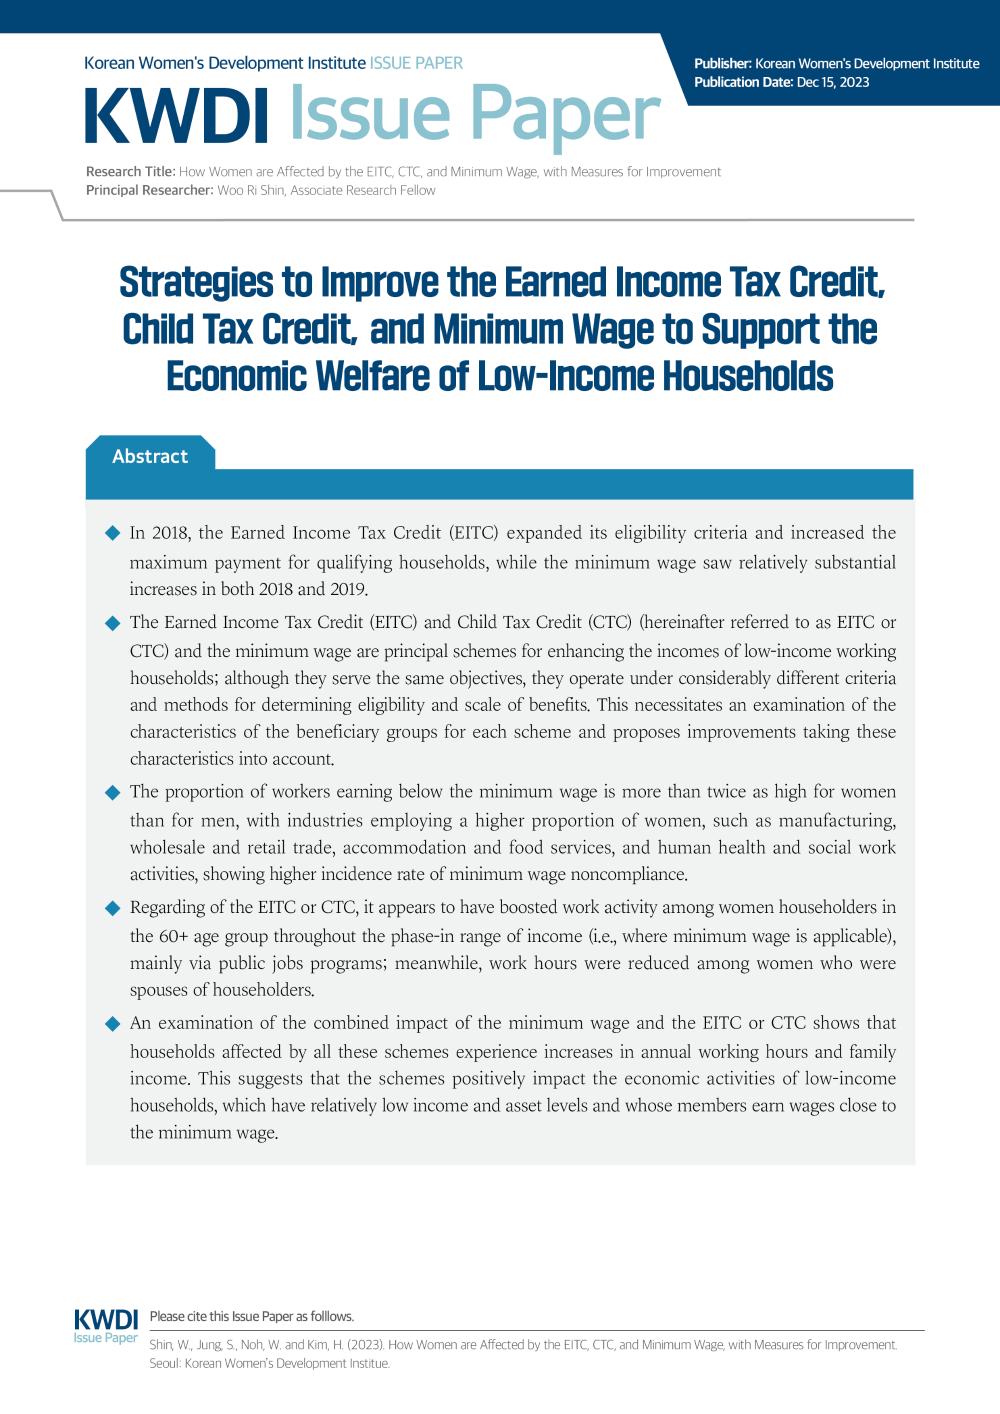 [Issue Paper] Strategies to Improve the Earned Income Tax Credit, Child Tax Credit, and Minimum Wage to Support the Economic Welfare of Low-Income Households